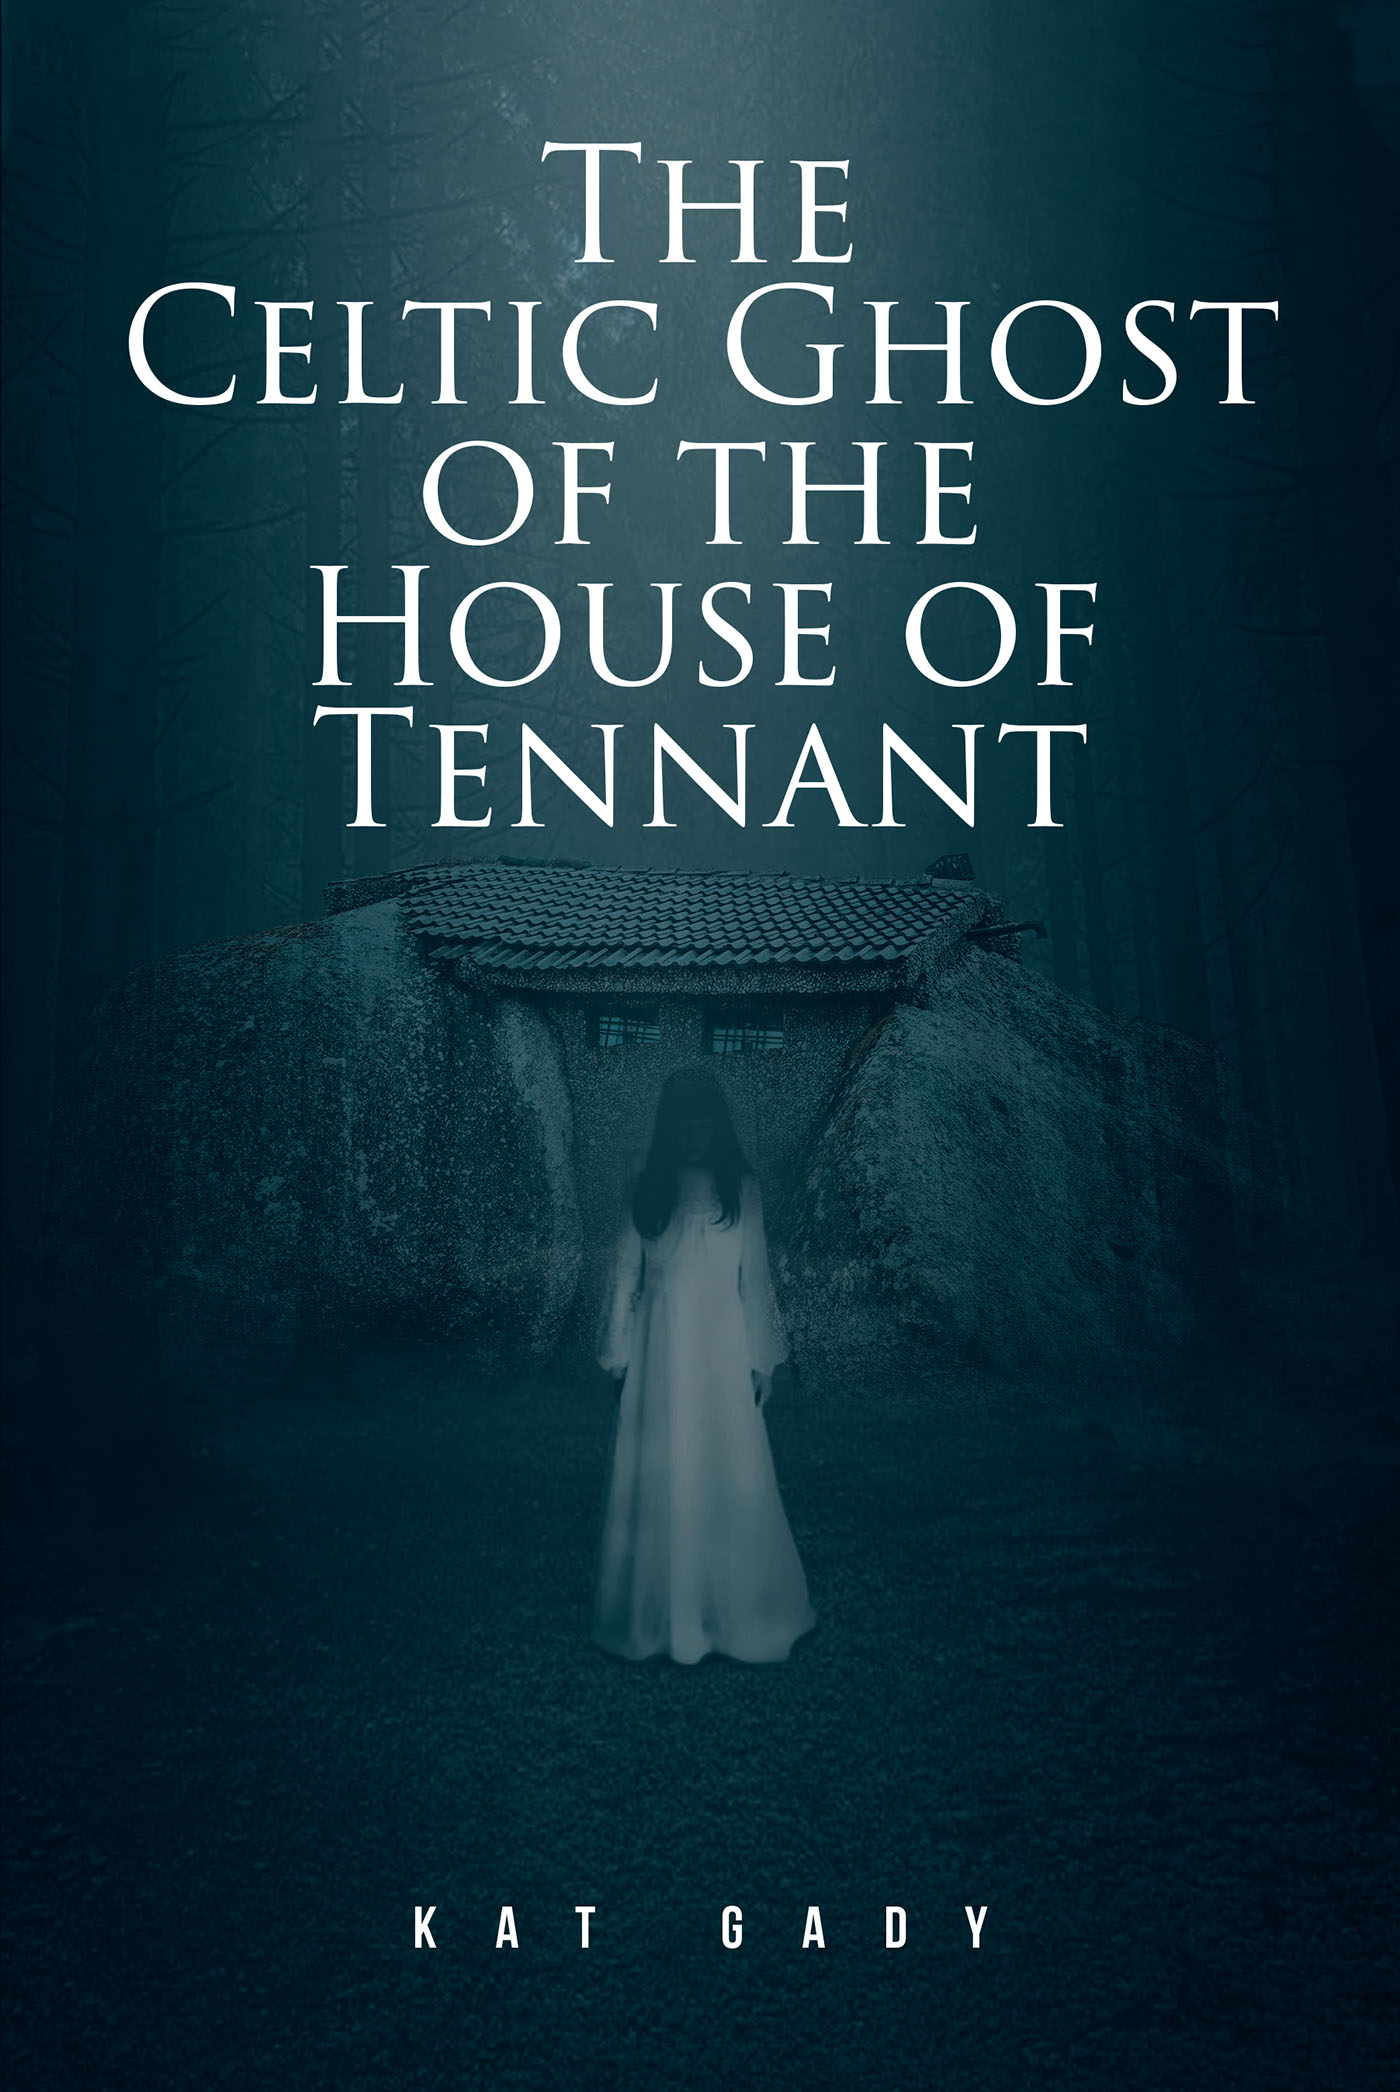 Kat Gady’s New Book, "The Celtic Ghost of the House of Tennant," Weaves a Story of Love, Defiance, and the Secrets of an Ancient Stone House in Kentucky